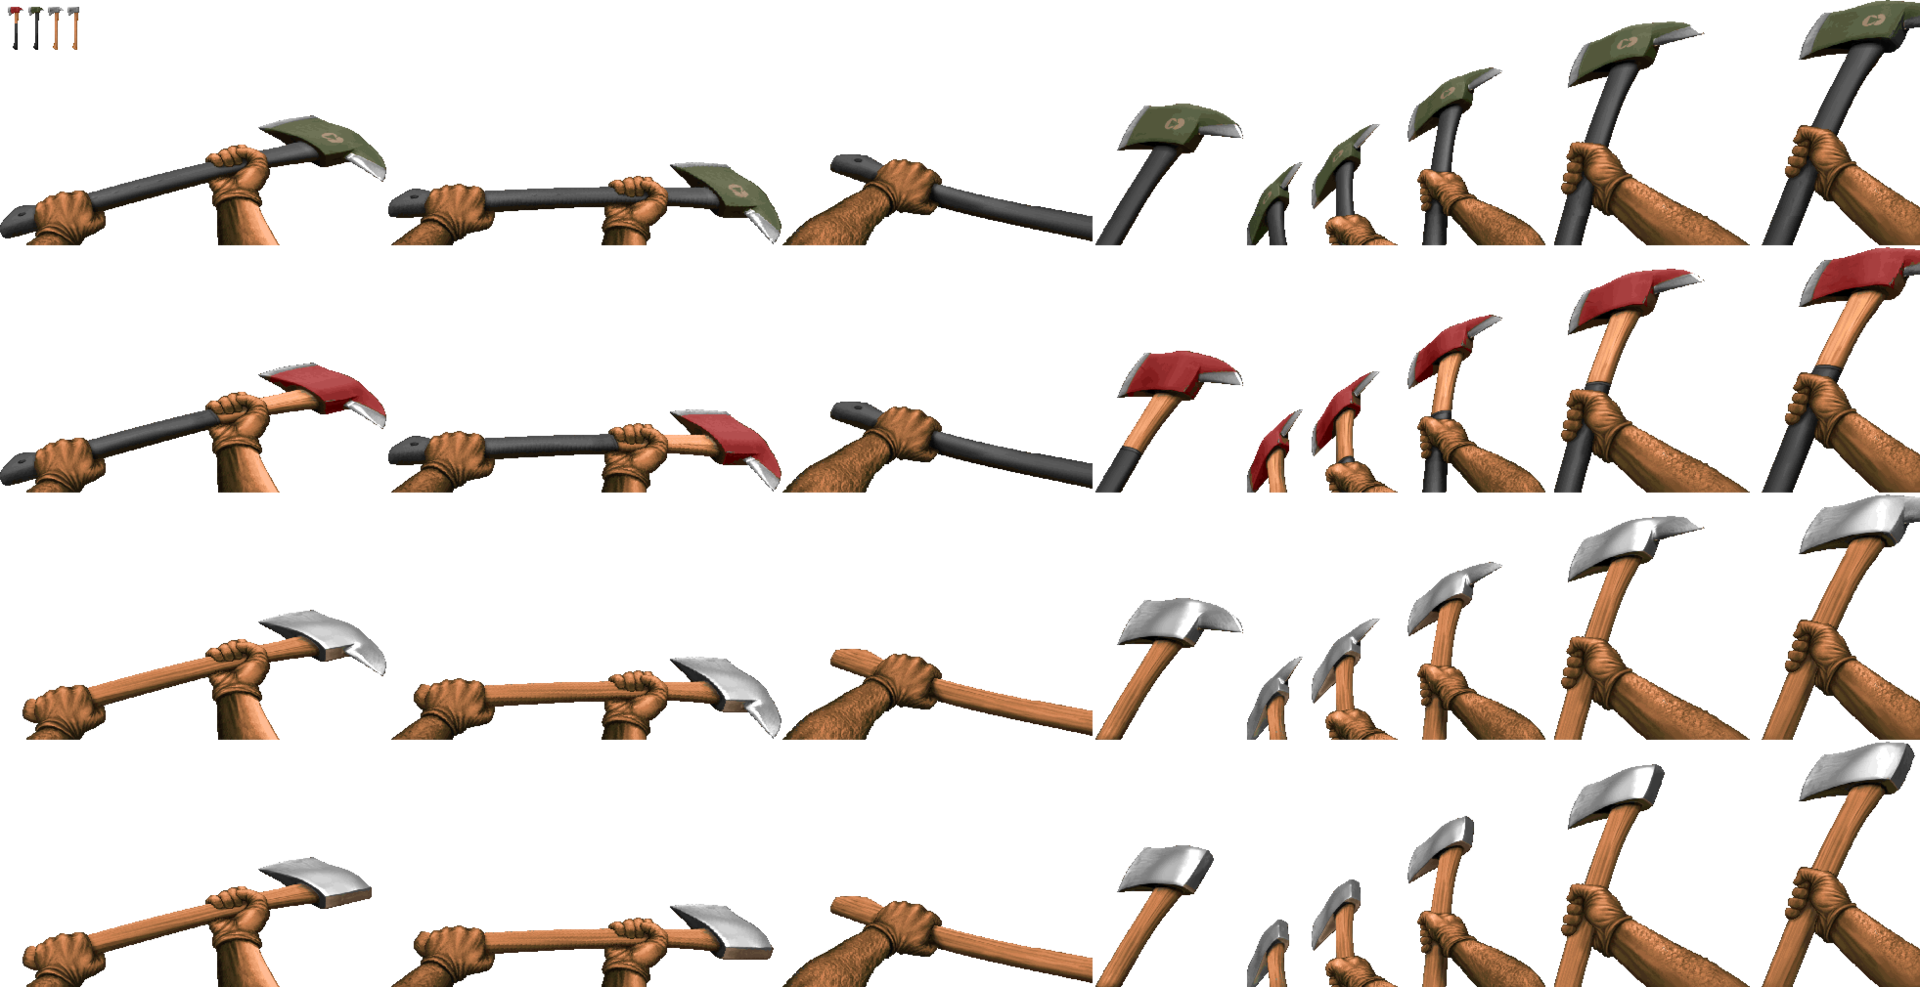 381785126_Axes_final_exportbyneoworm.png.4fb69d52070aeb969fd22bf9011f7327.png